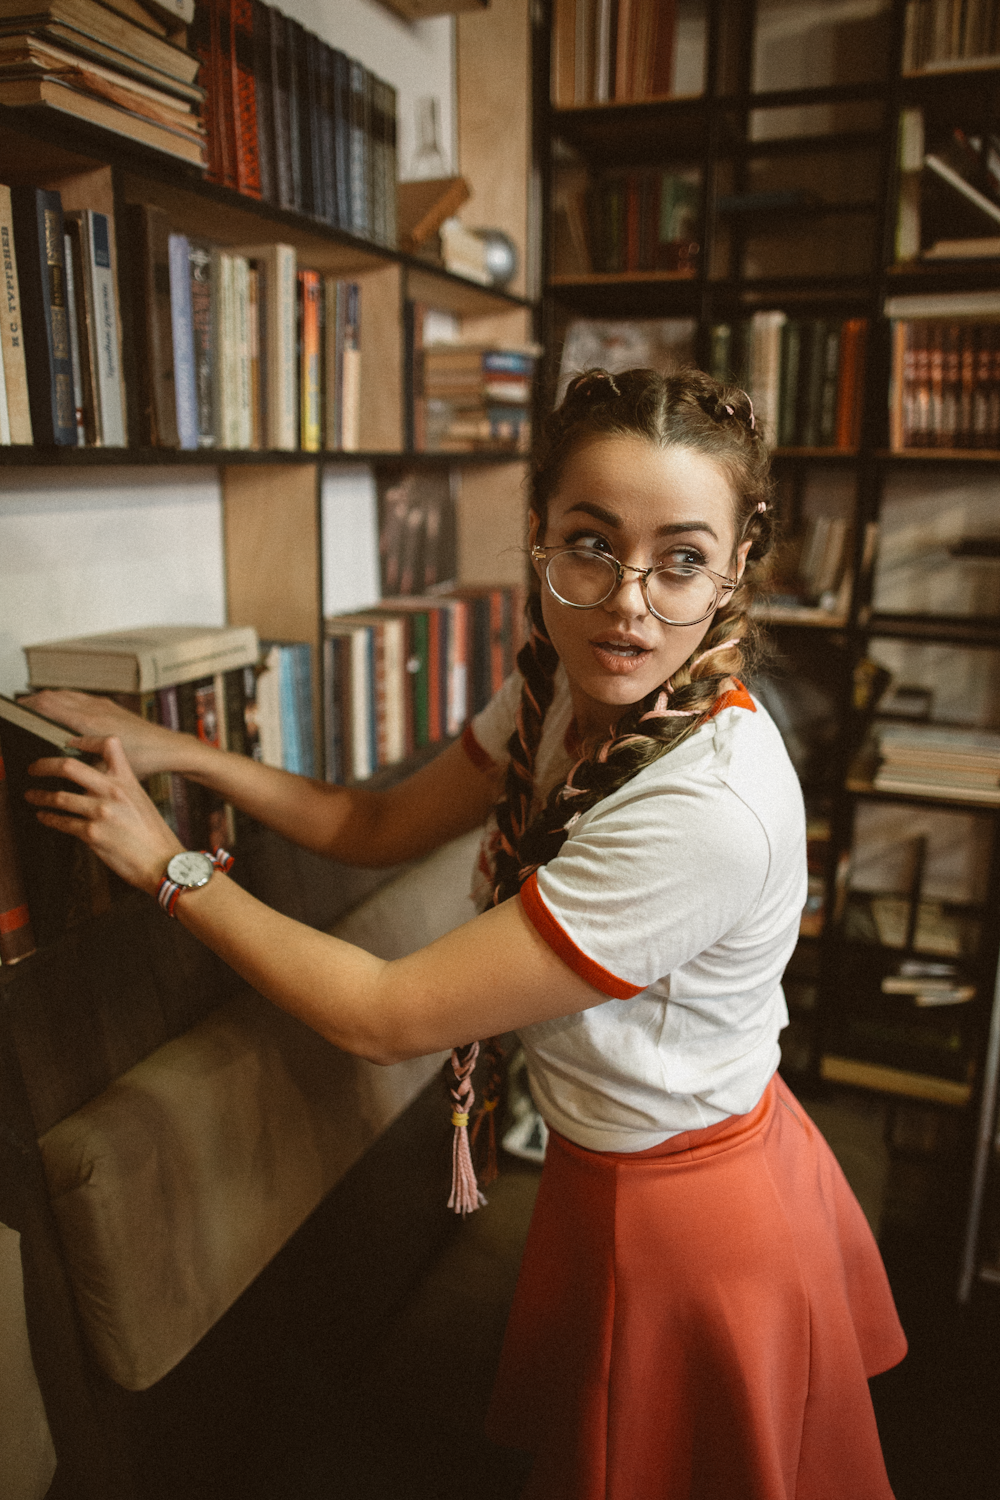 Woman in a vintage outfit putting away a book in a store